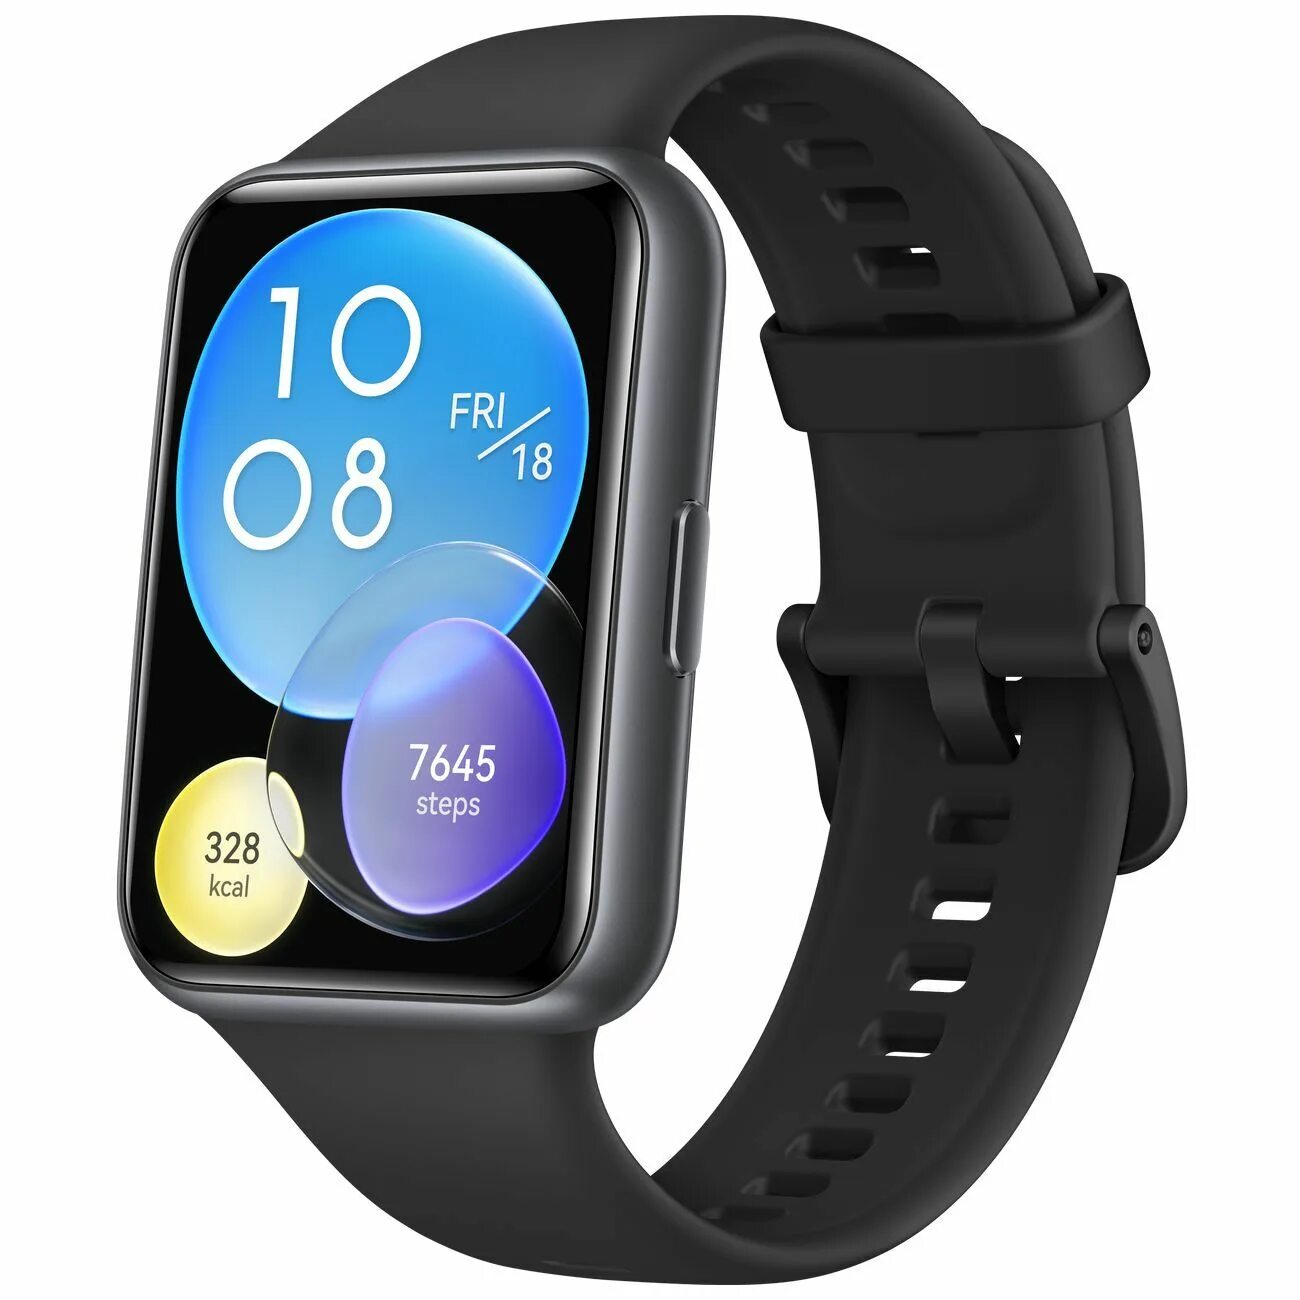 Huawei watch fit экраны. Huawei Fit 2. Часы Huawei Fit 2. Часы Хуавей вотч фит 2. Смарт-часы Huawei Fit 2 Active.